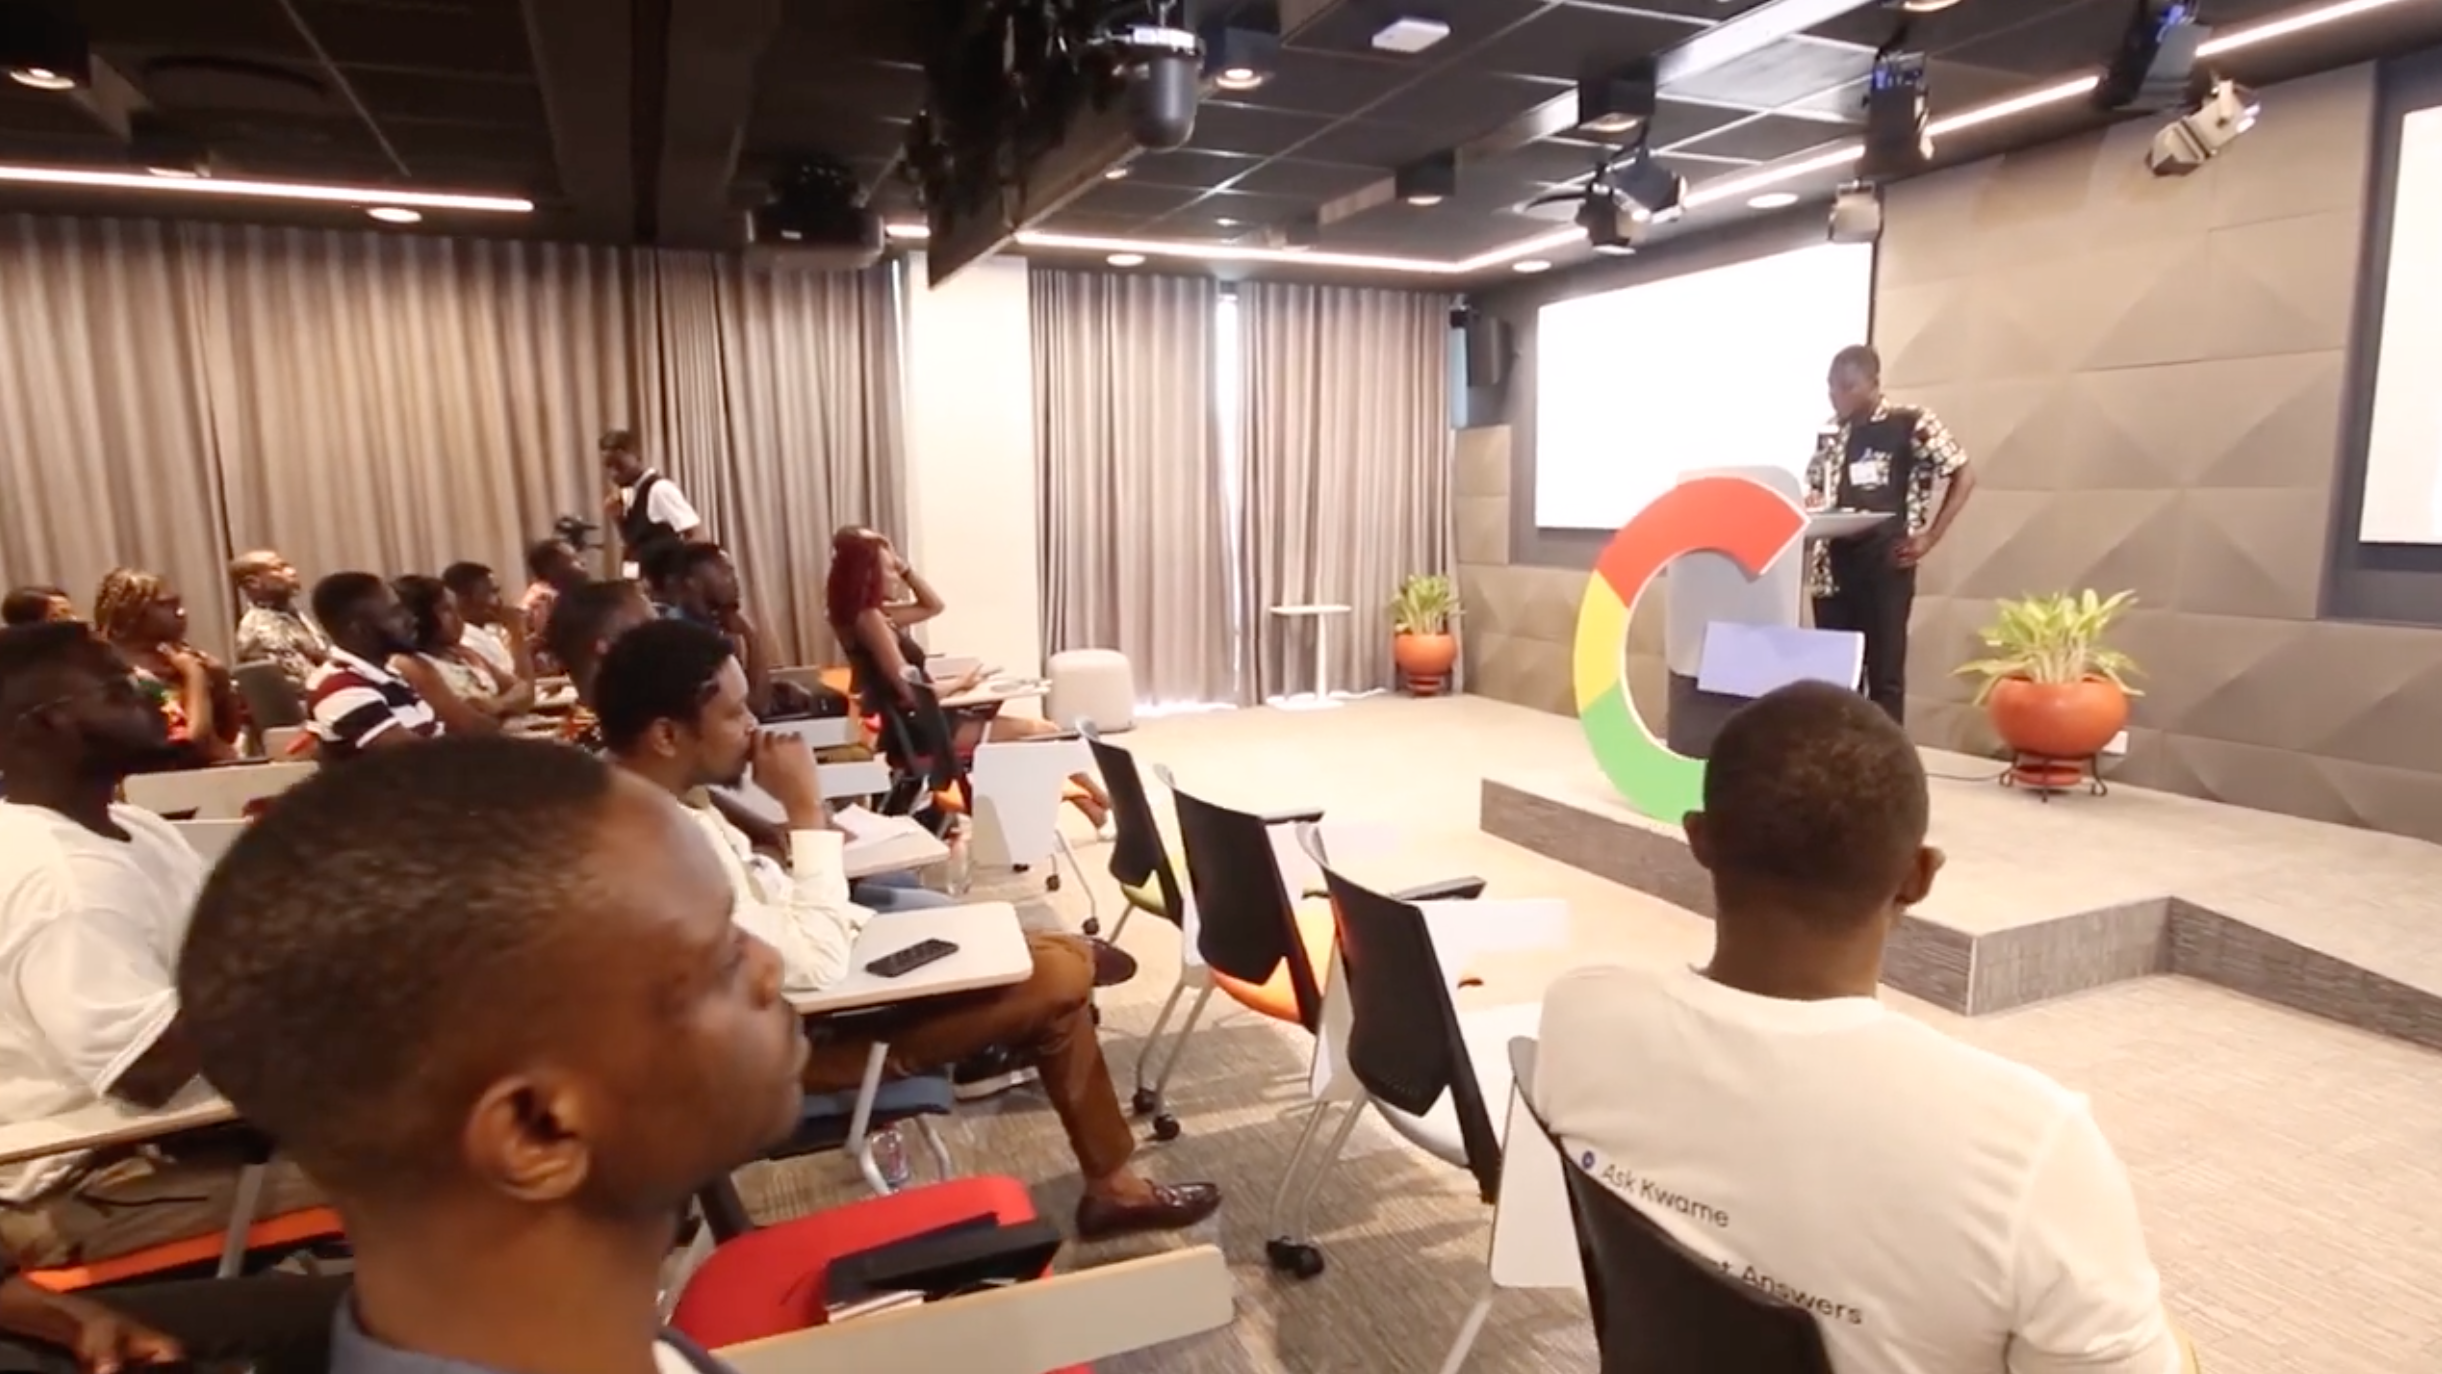 A grey high-tech looking conference room at the AfricAIED. A speaker stands on the right side in front of a seated audience. 